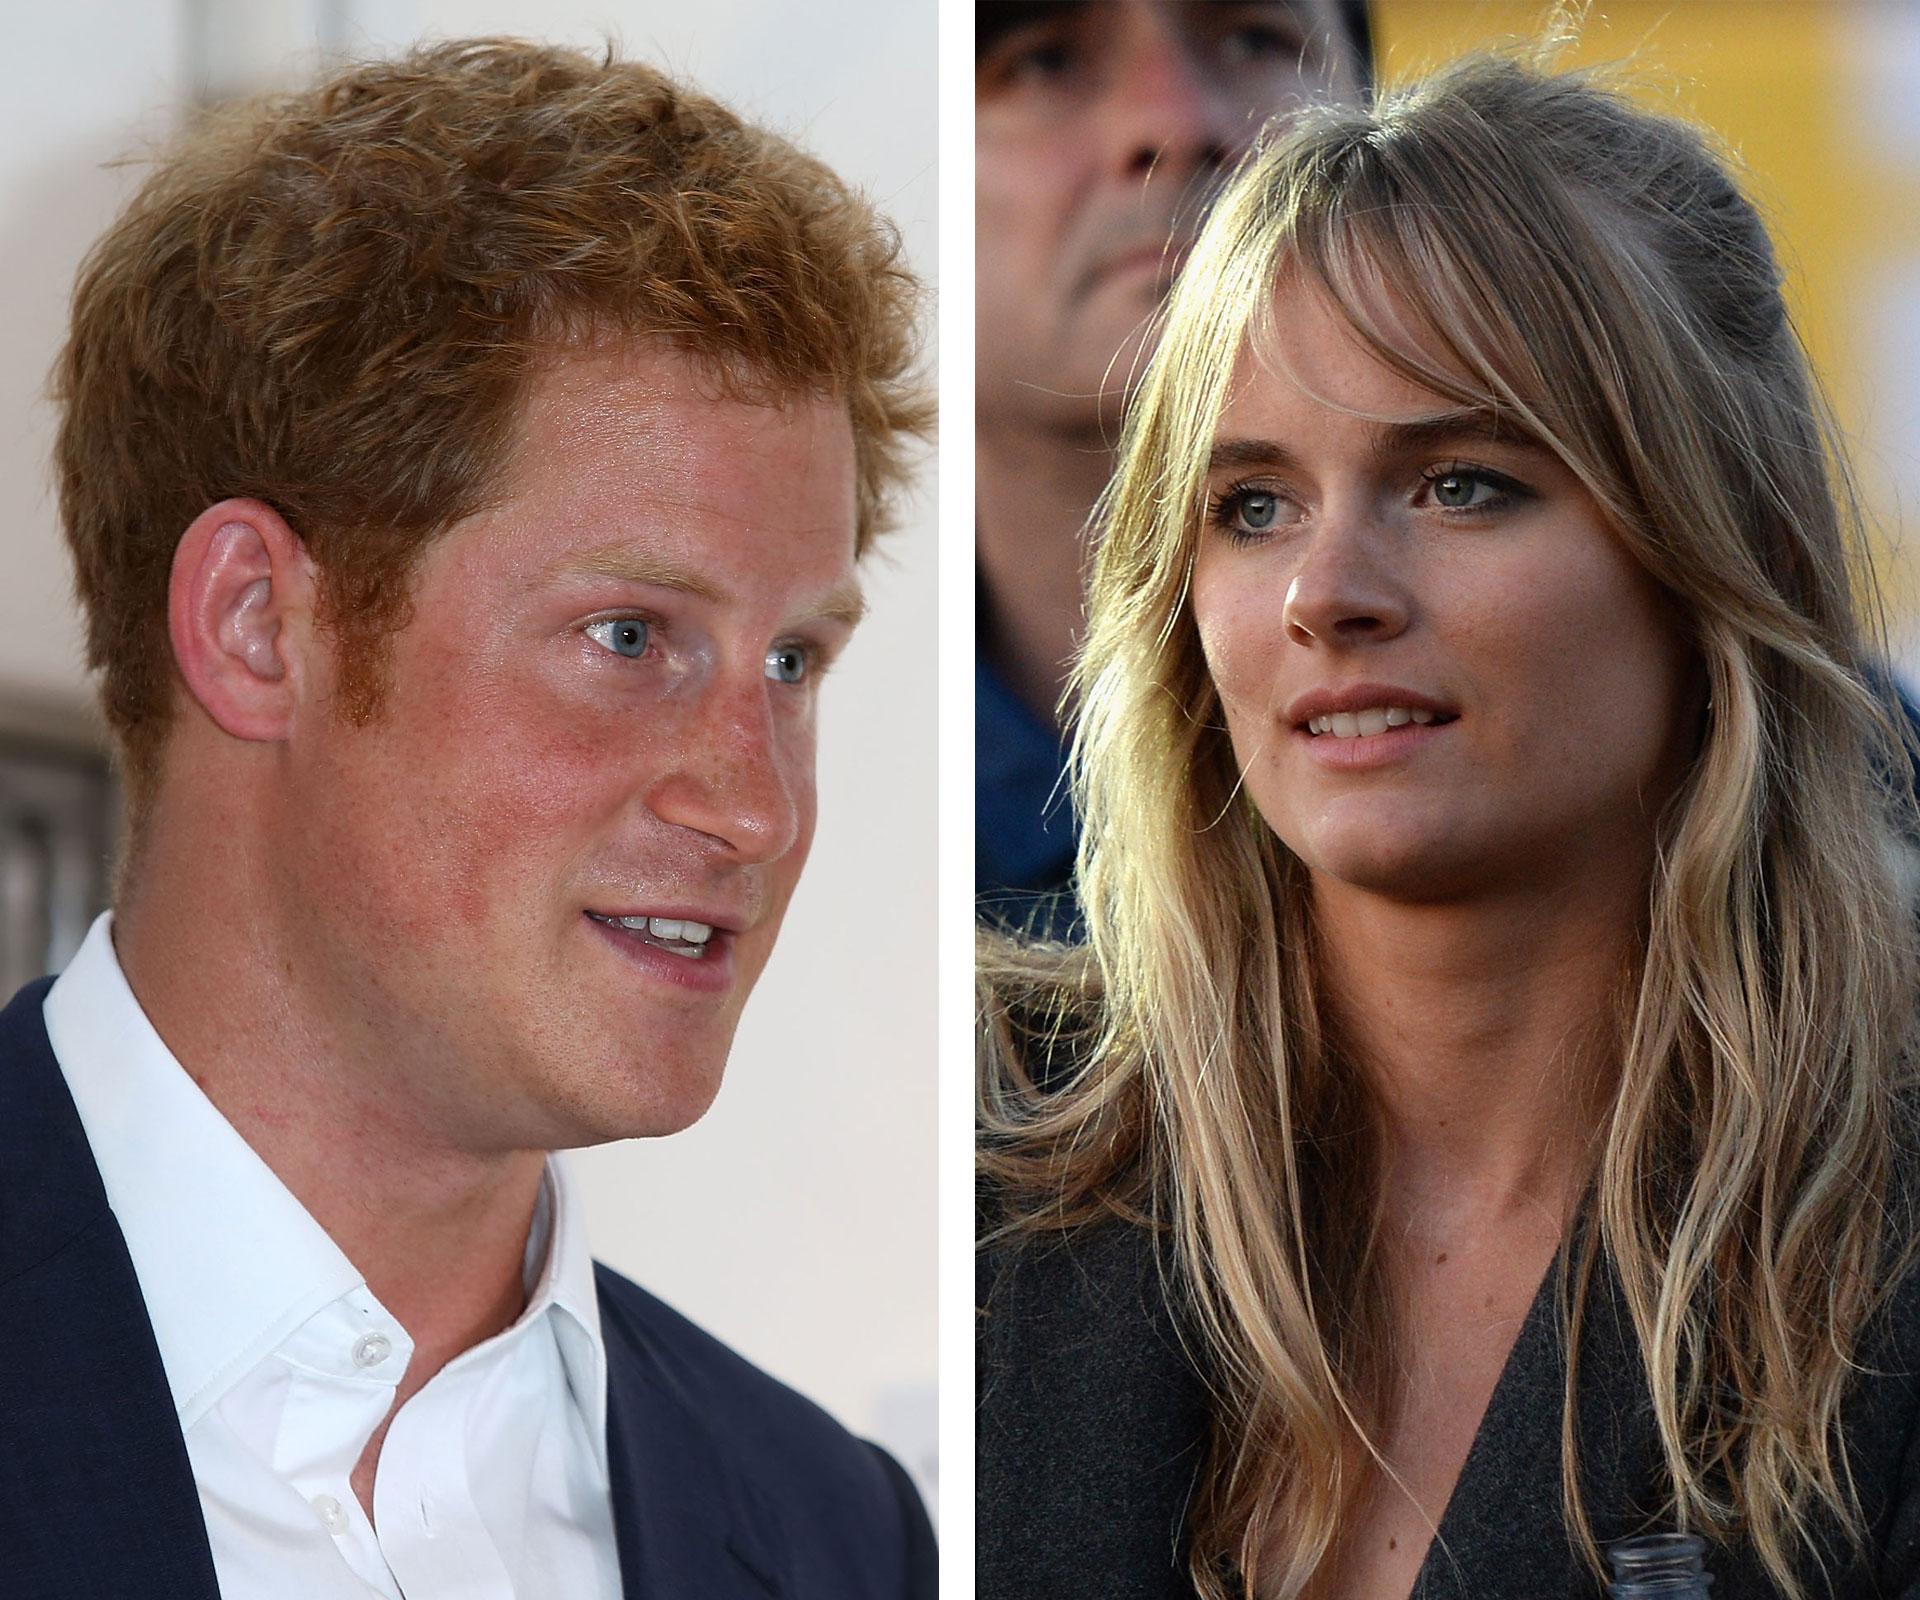 Is Prince Harry engaged?